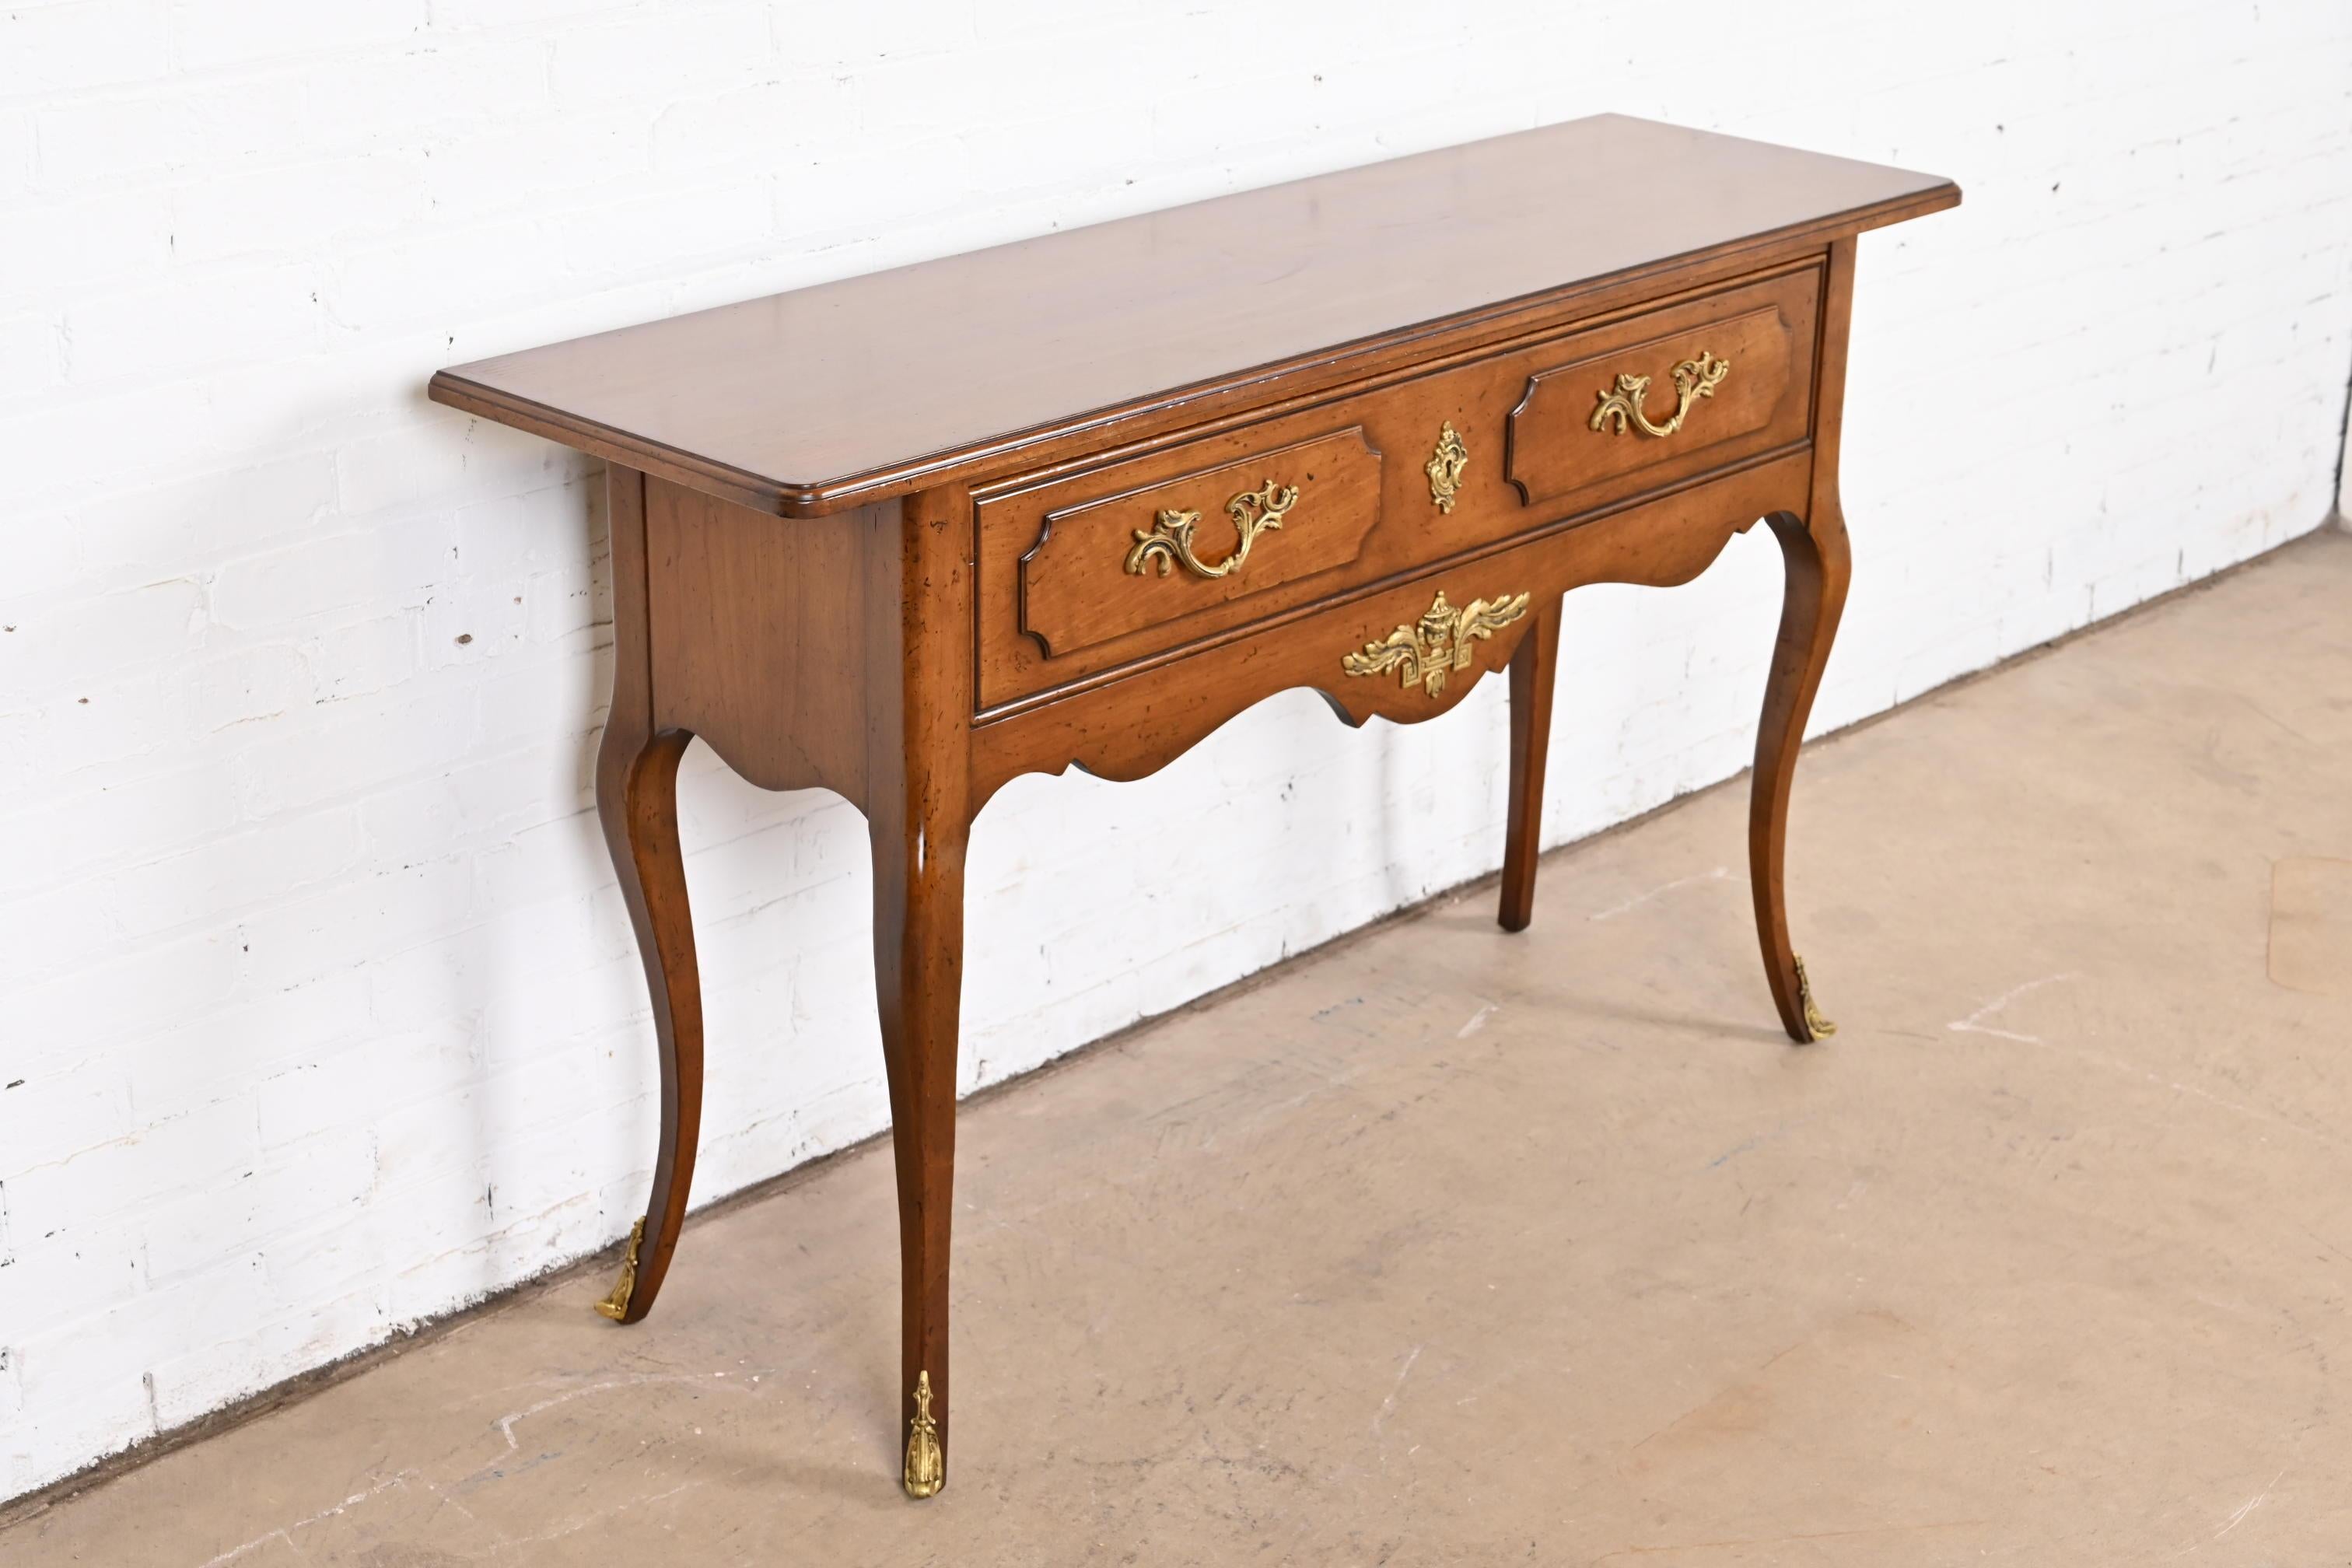 Bodart French Provincial Louis XV Fruitwood Console Table With Mounted Ormolu In Good Condition For Sale In South Bend, IN